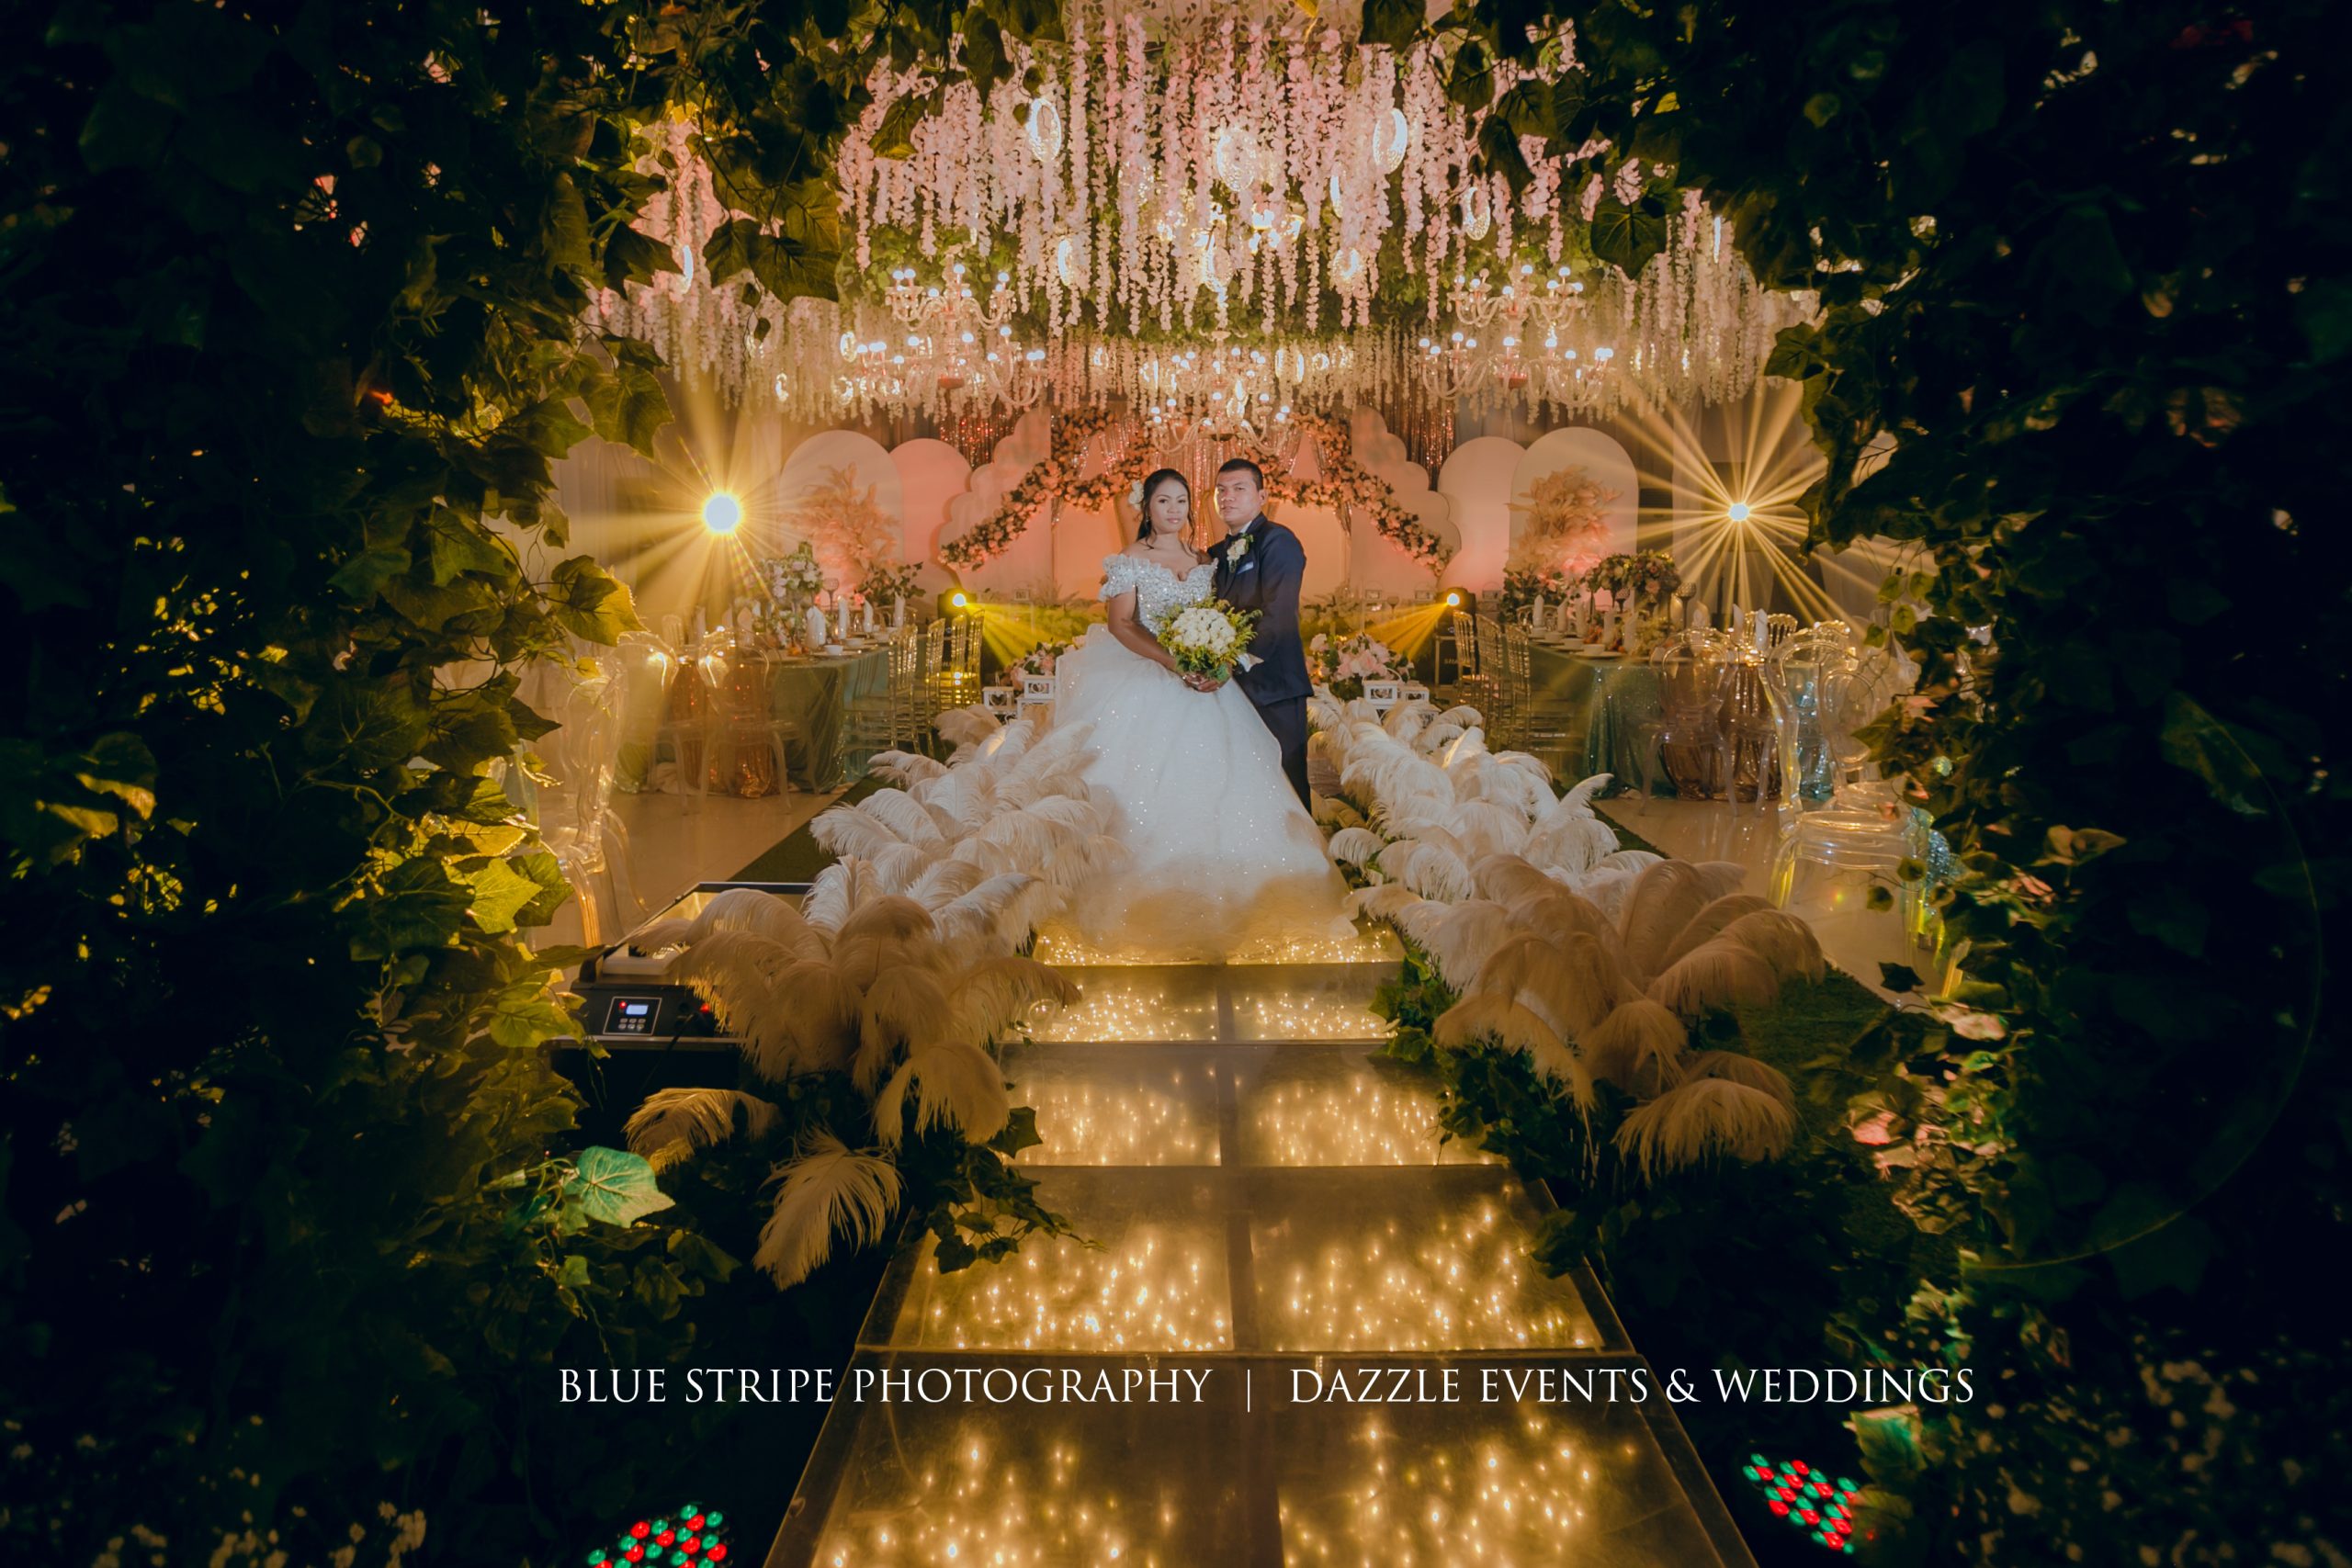 MG 0001 scaled - Dazzle Events And Weddings - Richard & Arialyn